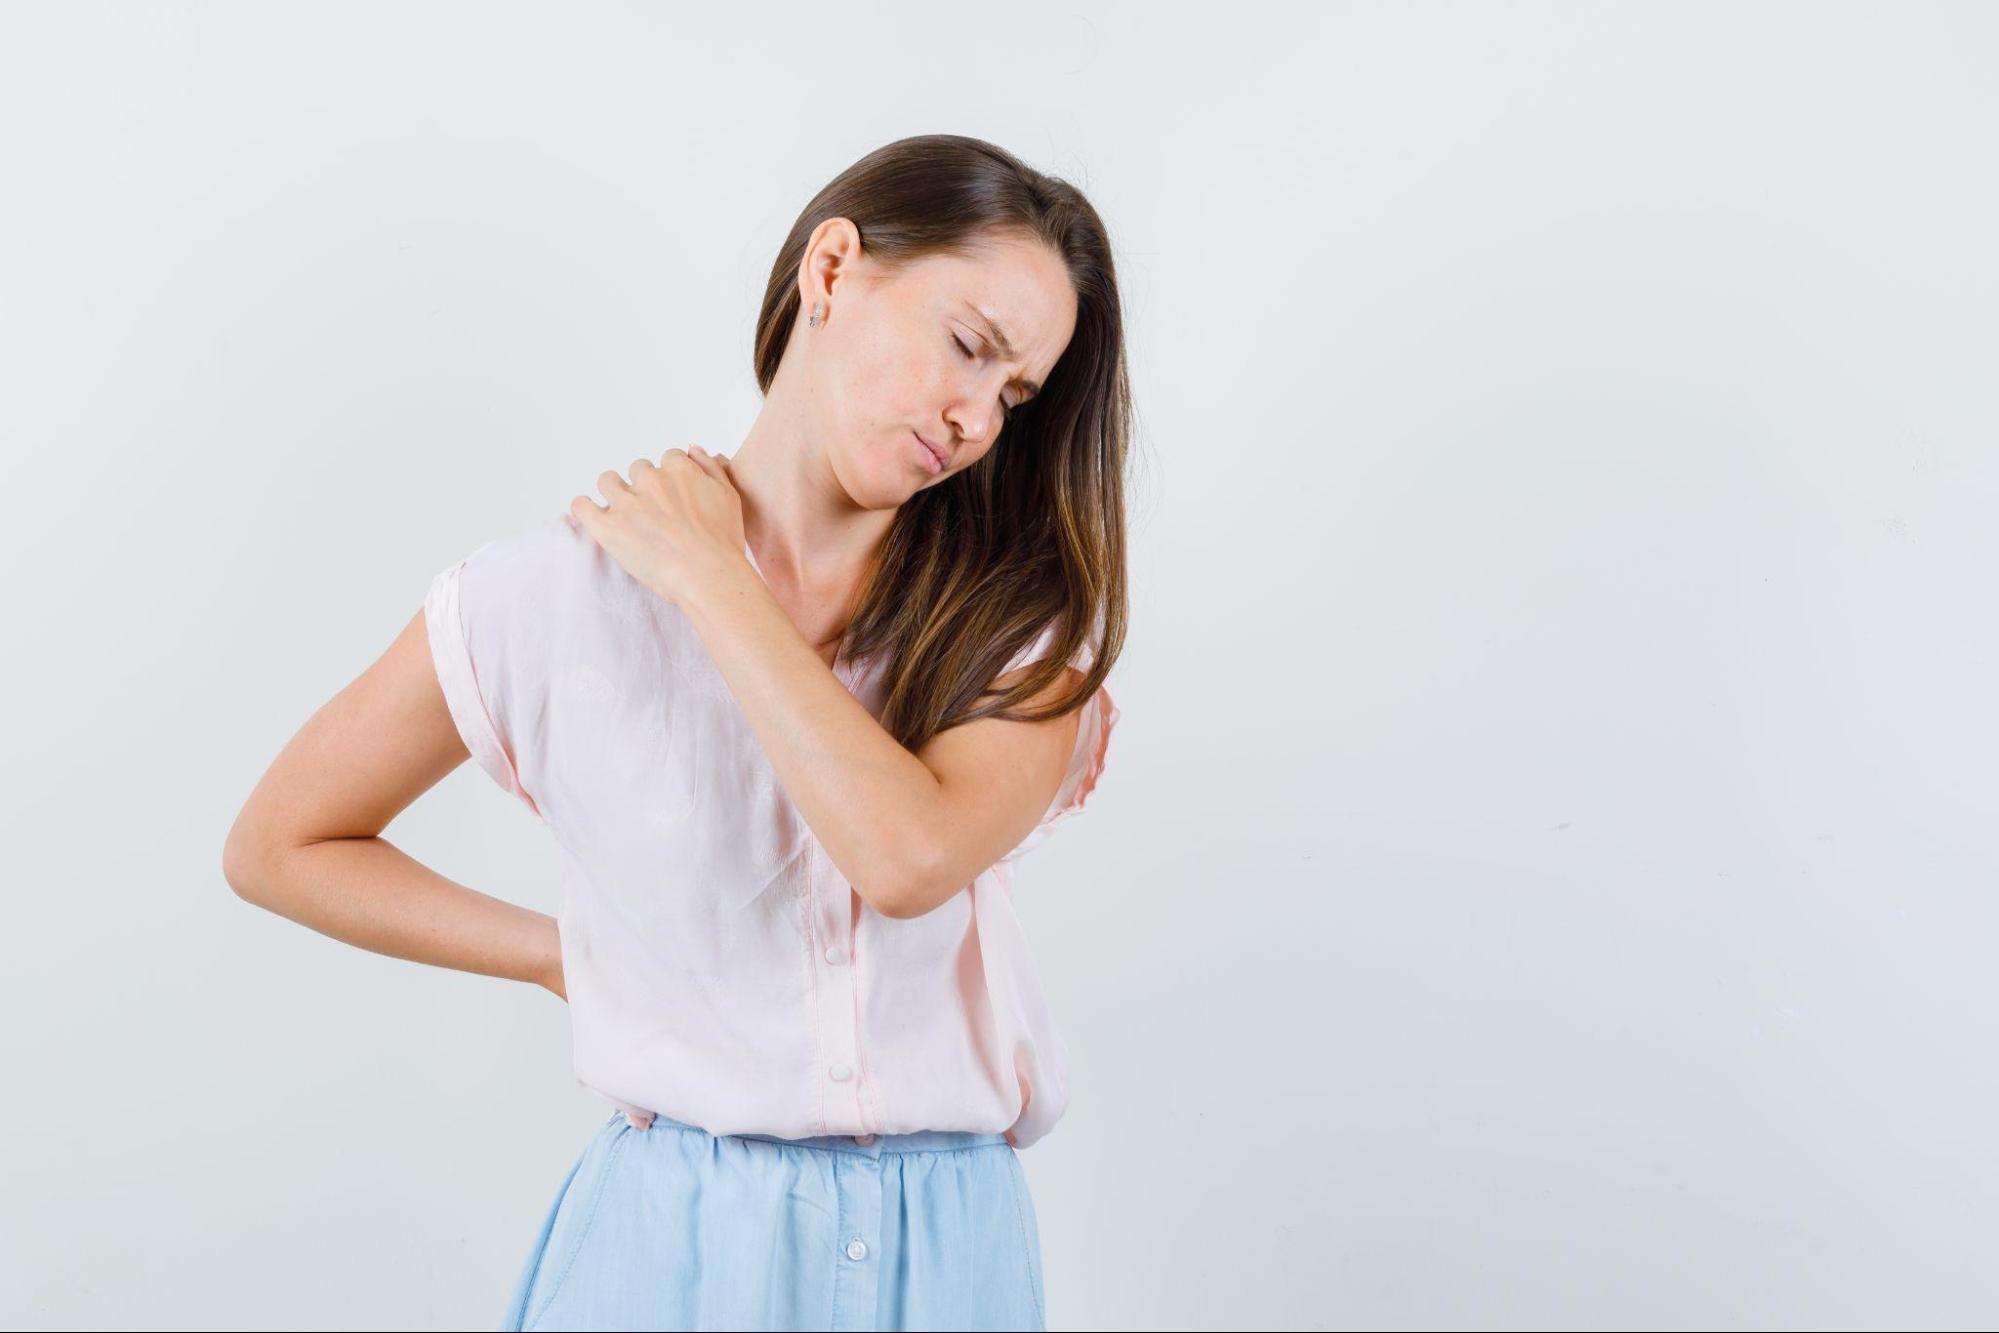 How to Alleviate Muscle Aches for Those Prone to Soreness